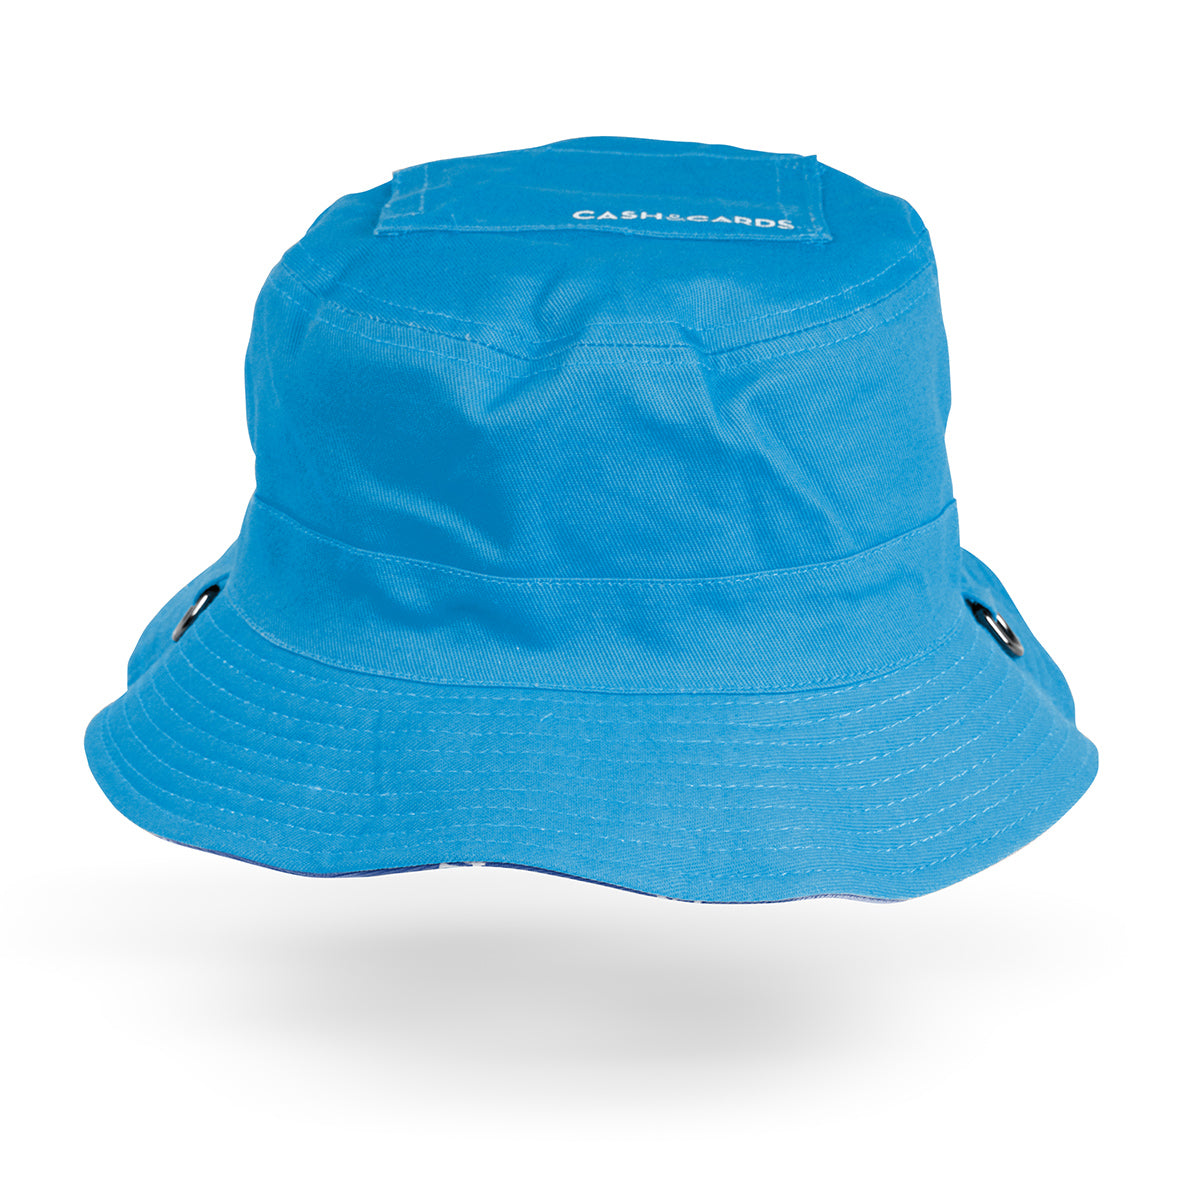 Lost Art Canada - blue coloured bucket hat inside front view